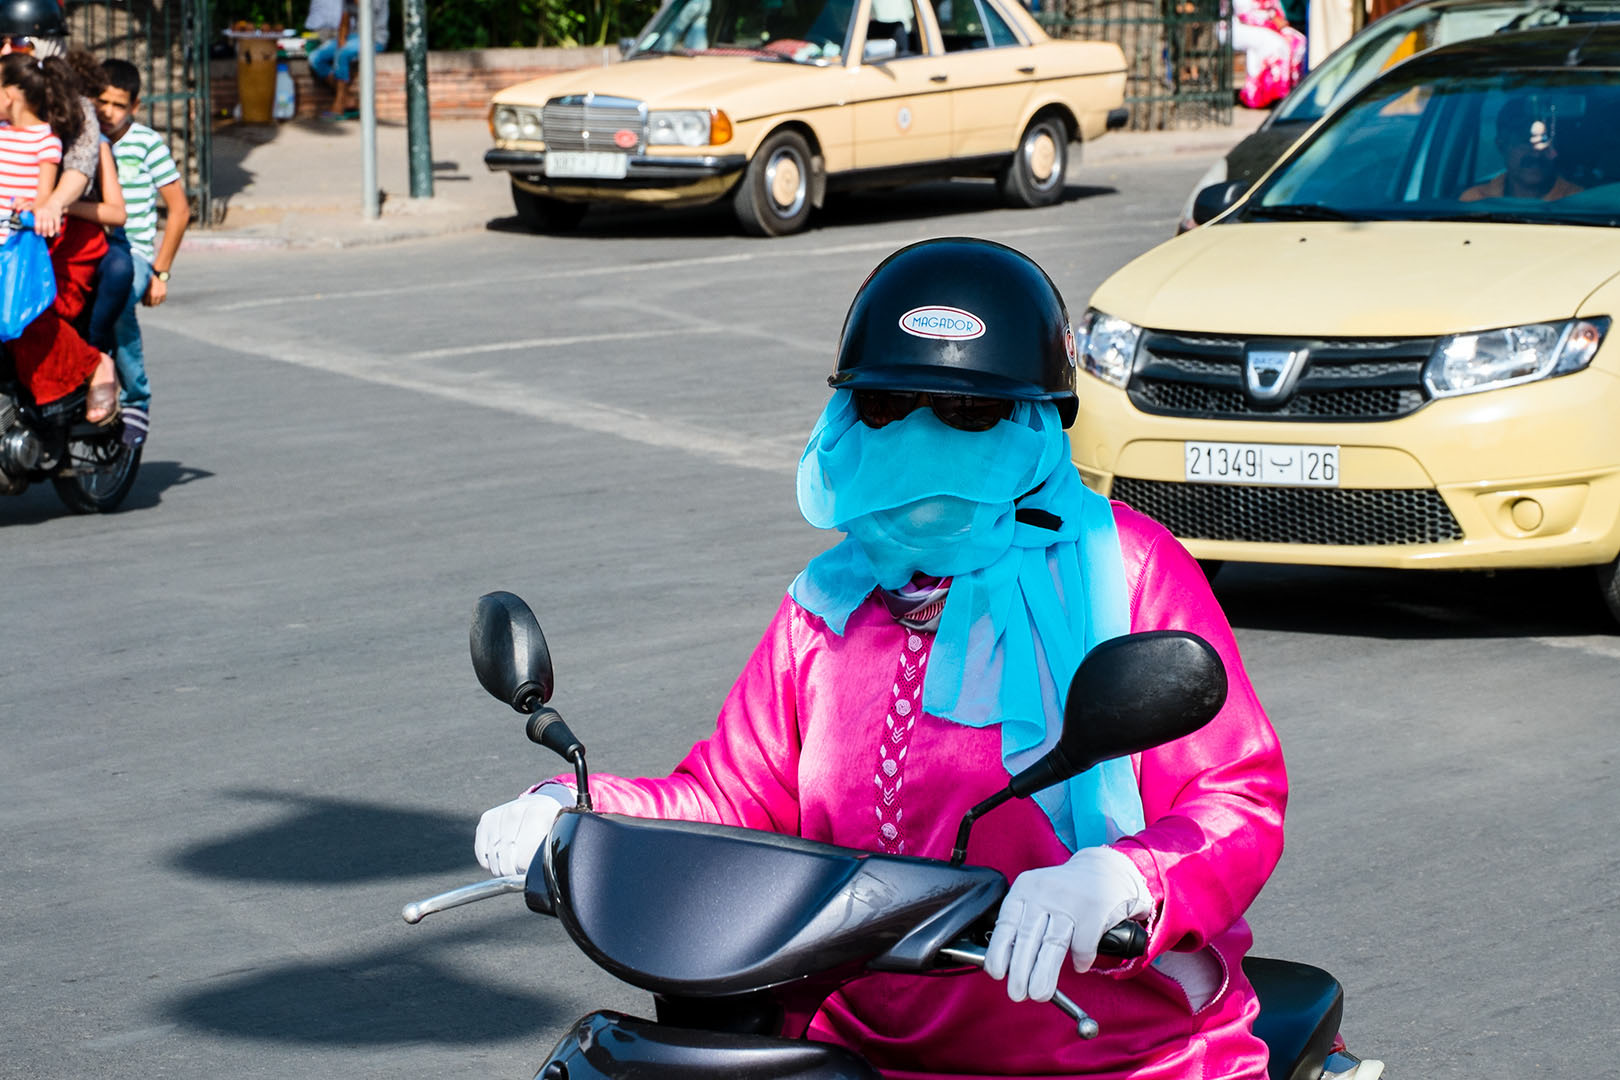 Woman on Scooter in traffic with Pink tunic, blue headscarf, white gloves and dark glasses